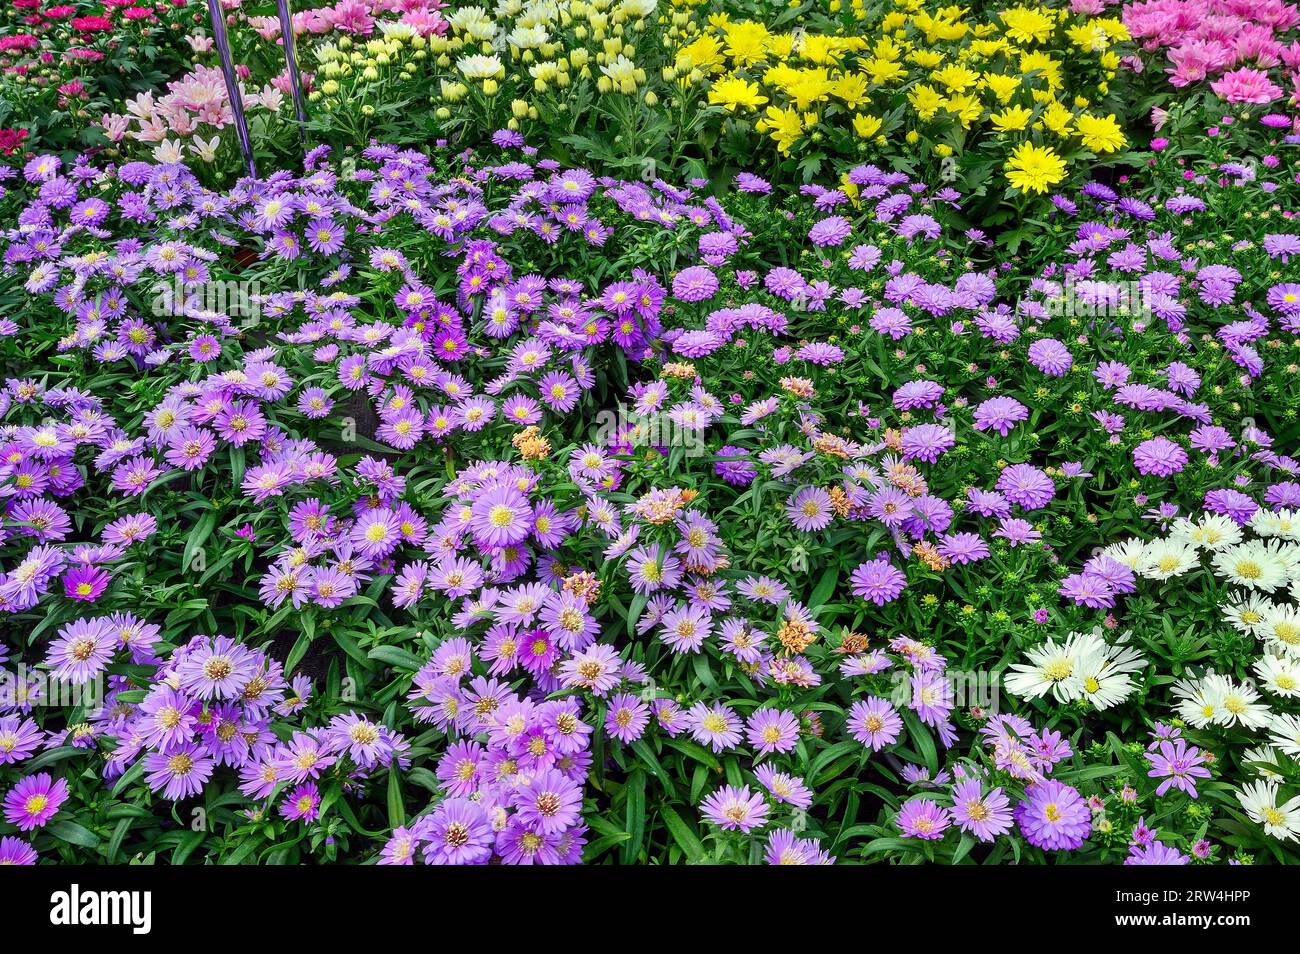 New Belgian (Symphyotrichum novi-belgii) asters, or smooth-leaved asters, in a garden centre, Allgaeu, Bavaria, Germany Stock Photo